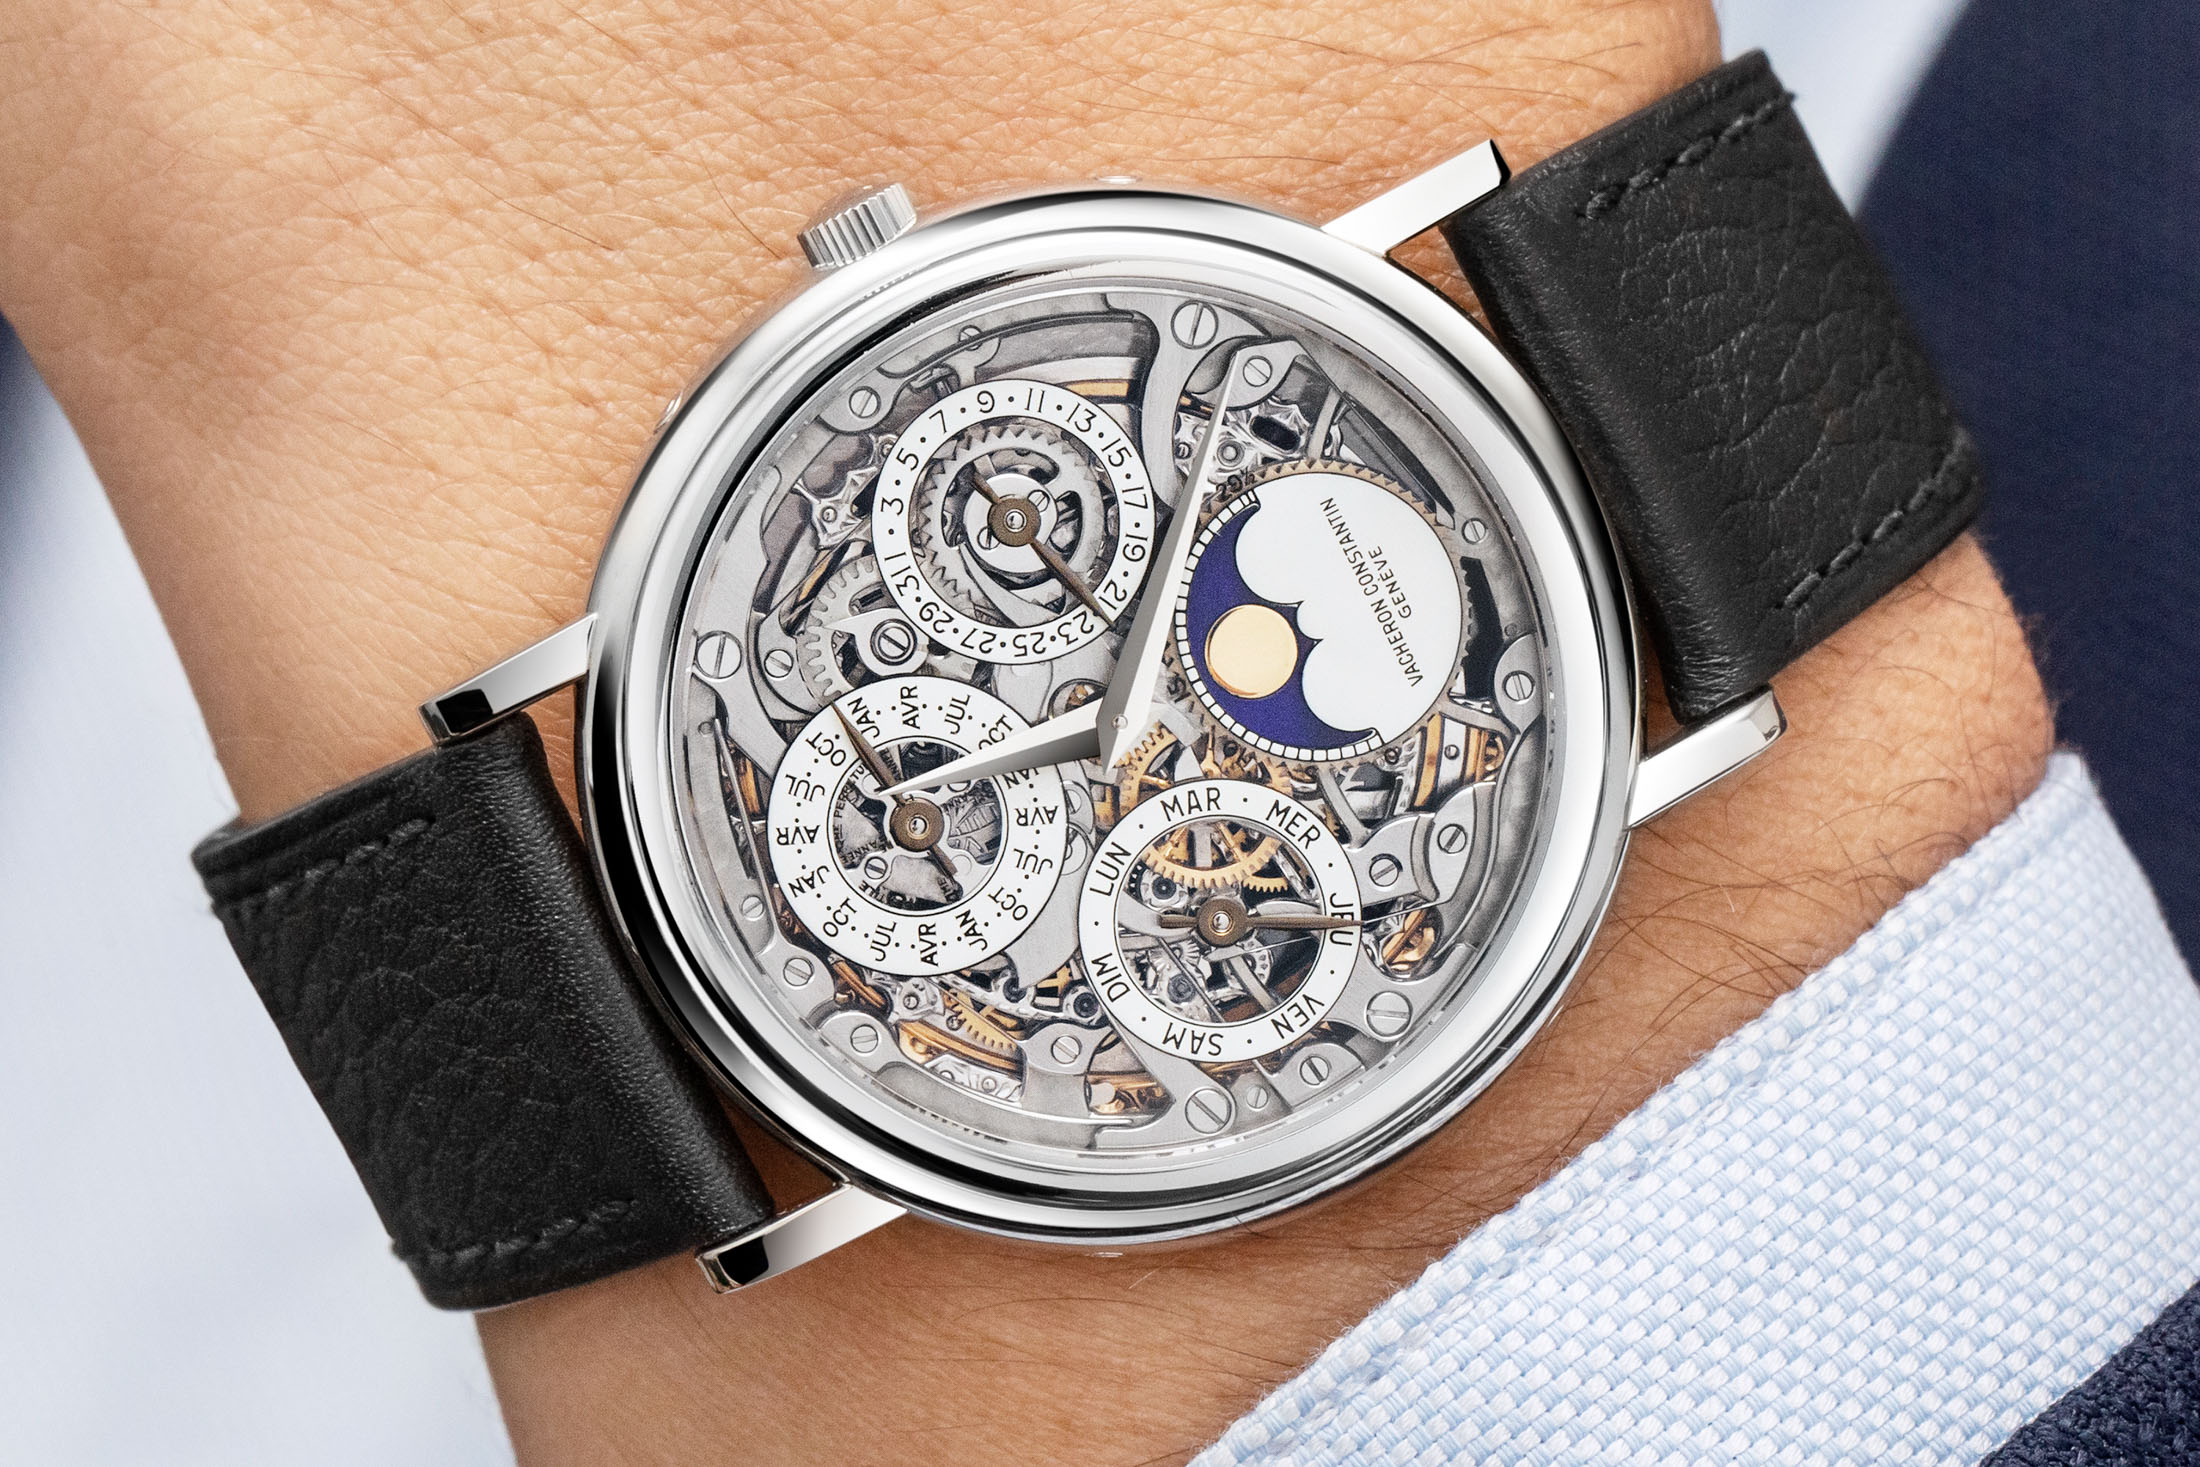 Why the Louis Vuitton Spin Time shook the watch world